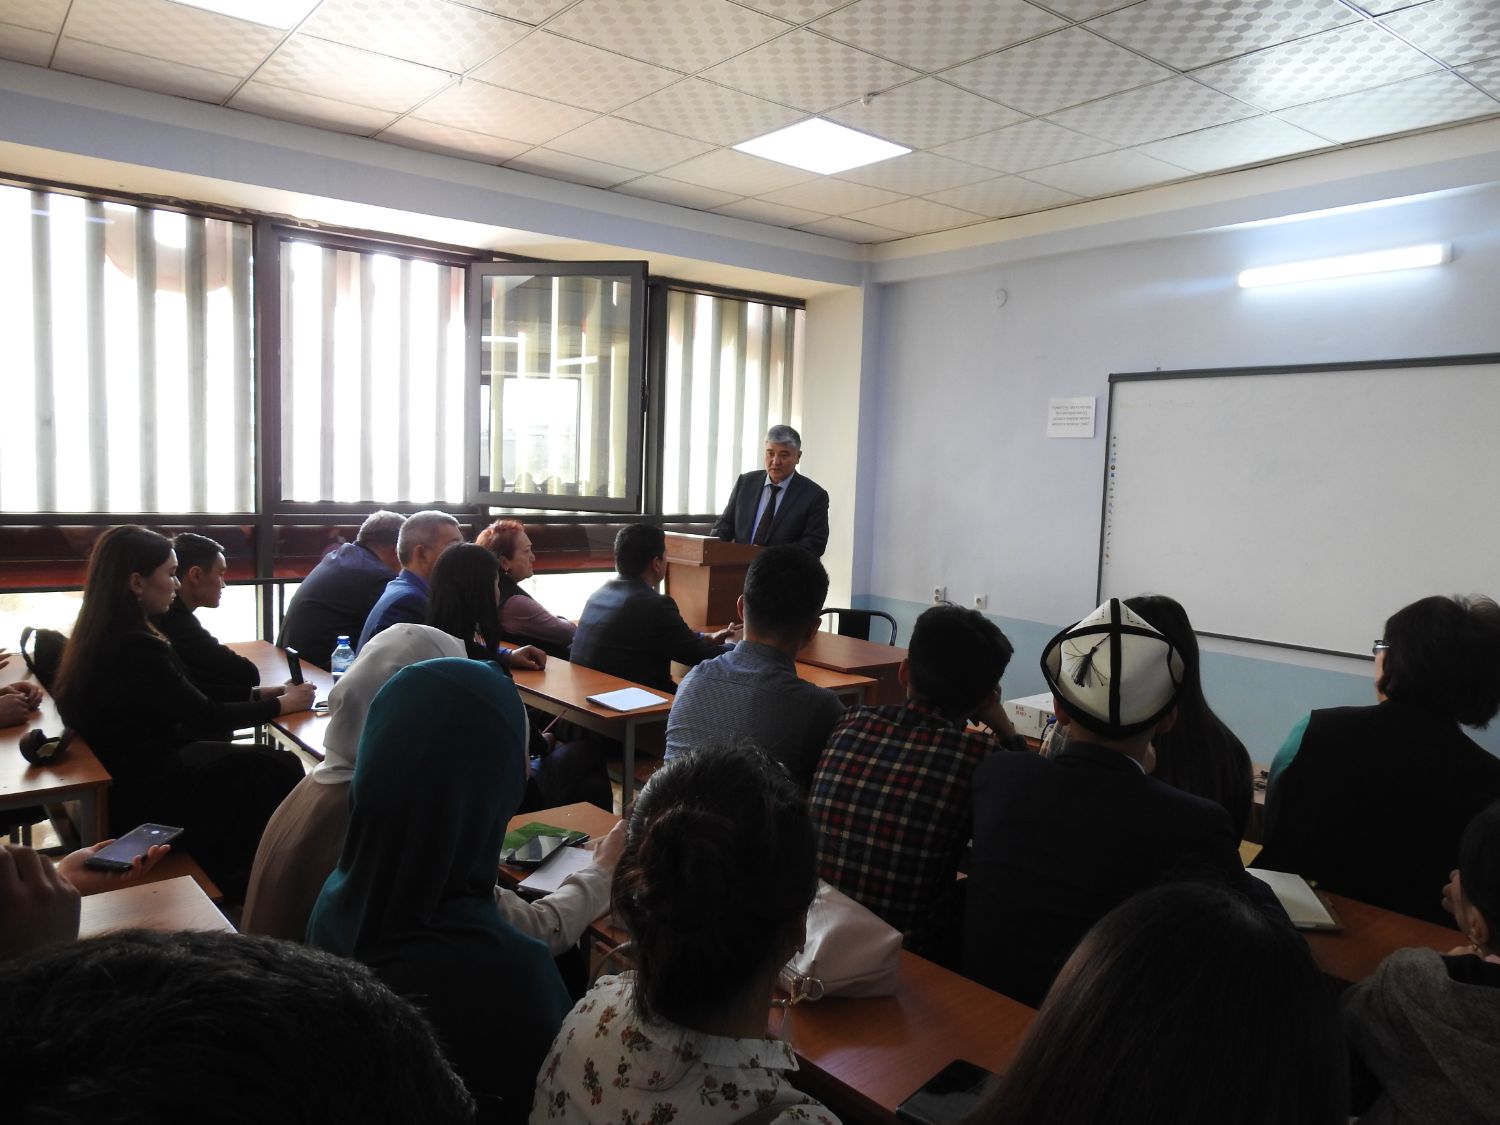 On 26th of March, 2019, on the occasion of the 75th anniversary of the formation of the Ministry of Foreign Affairs of the Kyrgyz Republic, an open lecture for students of the Faculty of International Relations of Osh State University was organized by the Plenipotentiary Representative of the Ministry of Foreign Affairs of the Kyrgyz Republic in Osh, Jalal-Abad and Batken regions.
During the lecture, Kaldarali Mamataliyev the Deputy Head of the Plenipotentiary spoke about the history of the formation and development of the diplomatic service of Kyrgyzstan, the activities of the Ministry of Foreign Affairs of the Kyrgyz Republic and the Plenipotentiary, as well as the priorities of the country's foreign policy.
In the framework of the lecture, students showed interest in the basic qualities of a modern diplomat, competitions held by the Ministry for filling vacant positions, as well as practical training opportunities in the structures of the Ministry. 
The lecture was attended by members of the Plenipotentiary, teachers of the faculty, as well as students of the faculty. 
Students attended this lecture with interest and were able to get answers to all their questions.
